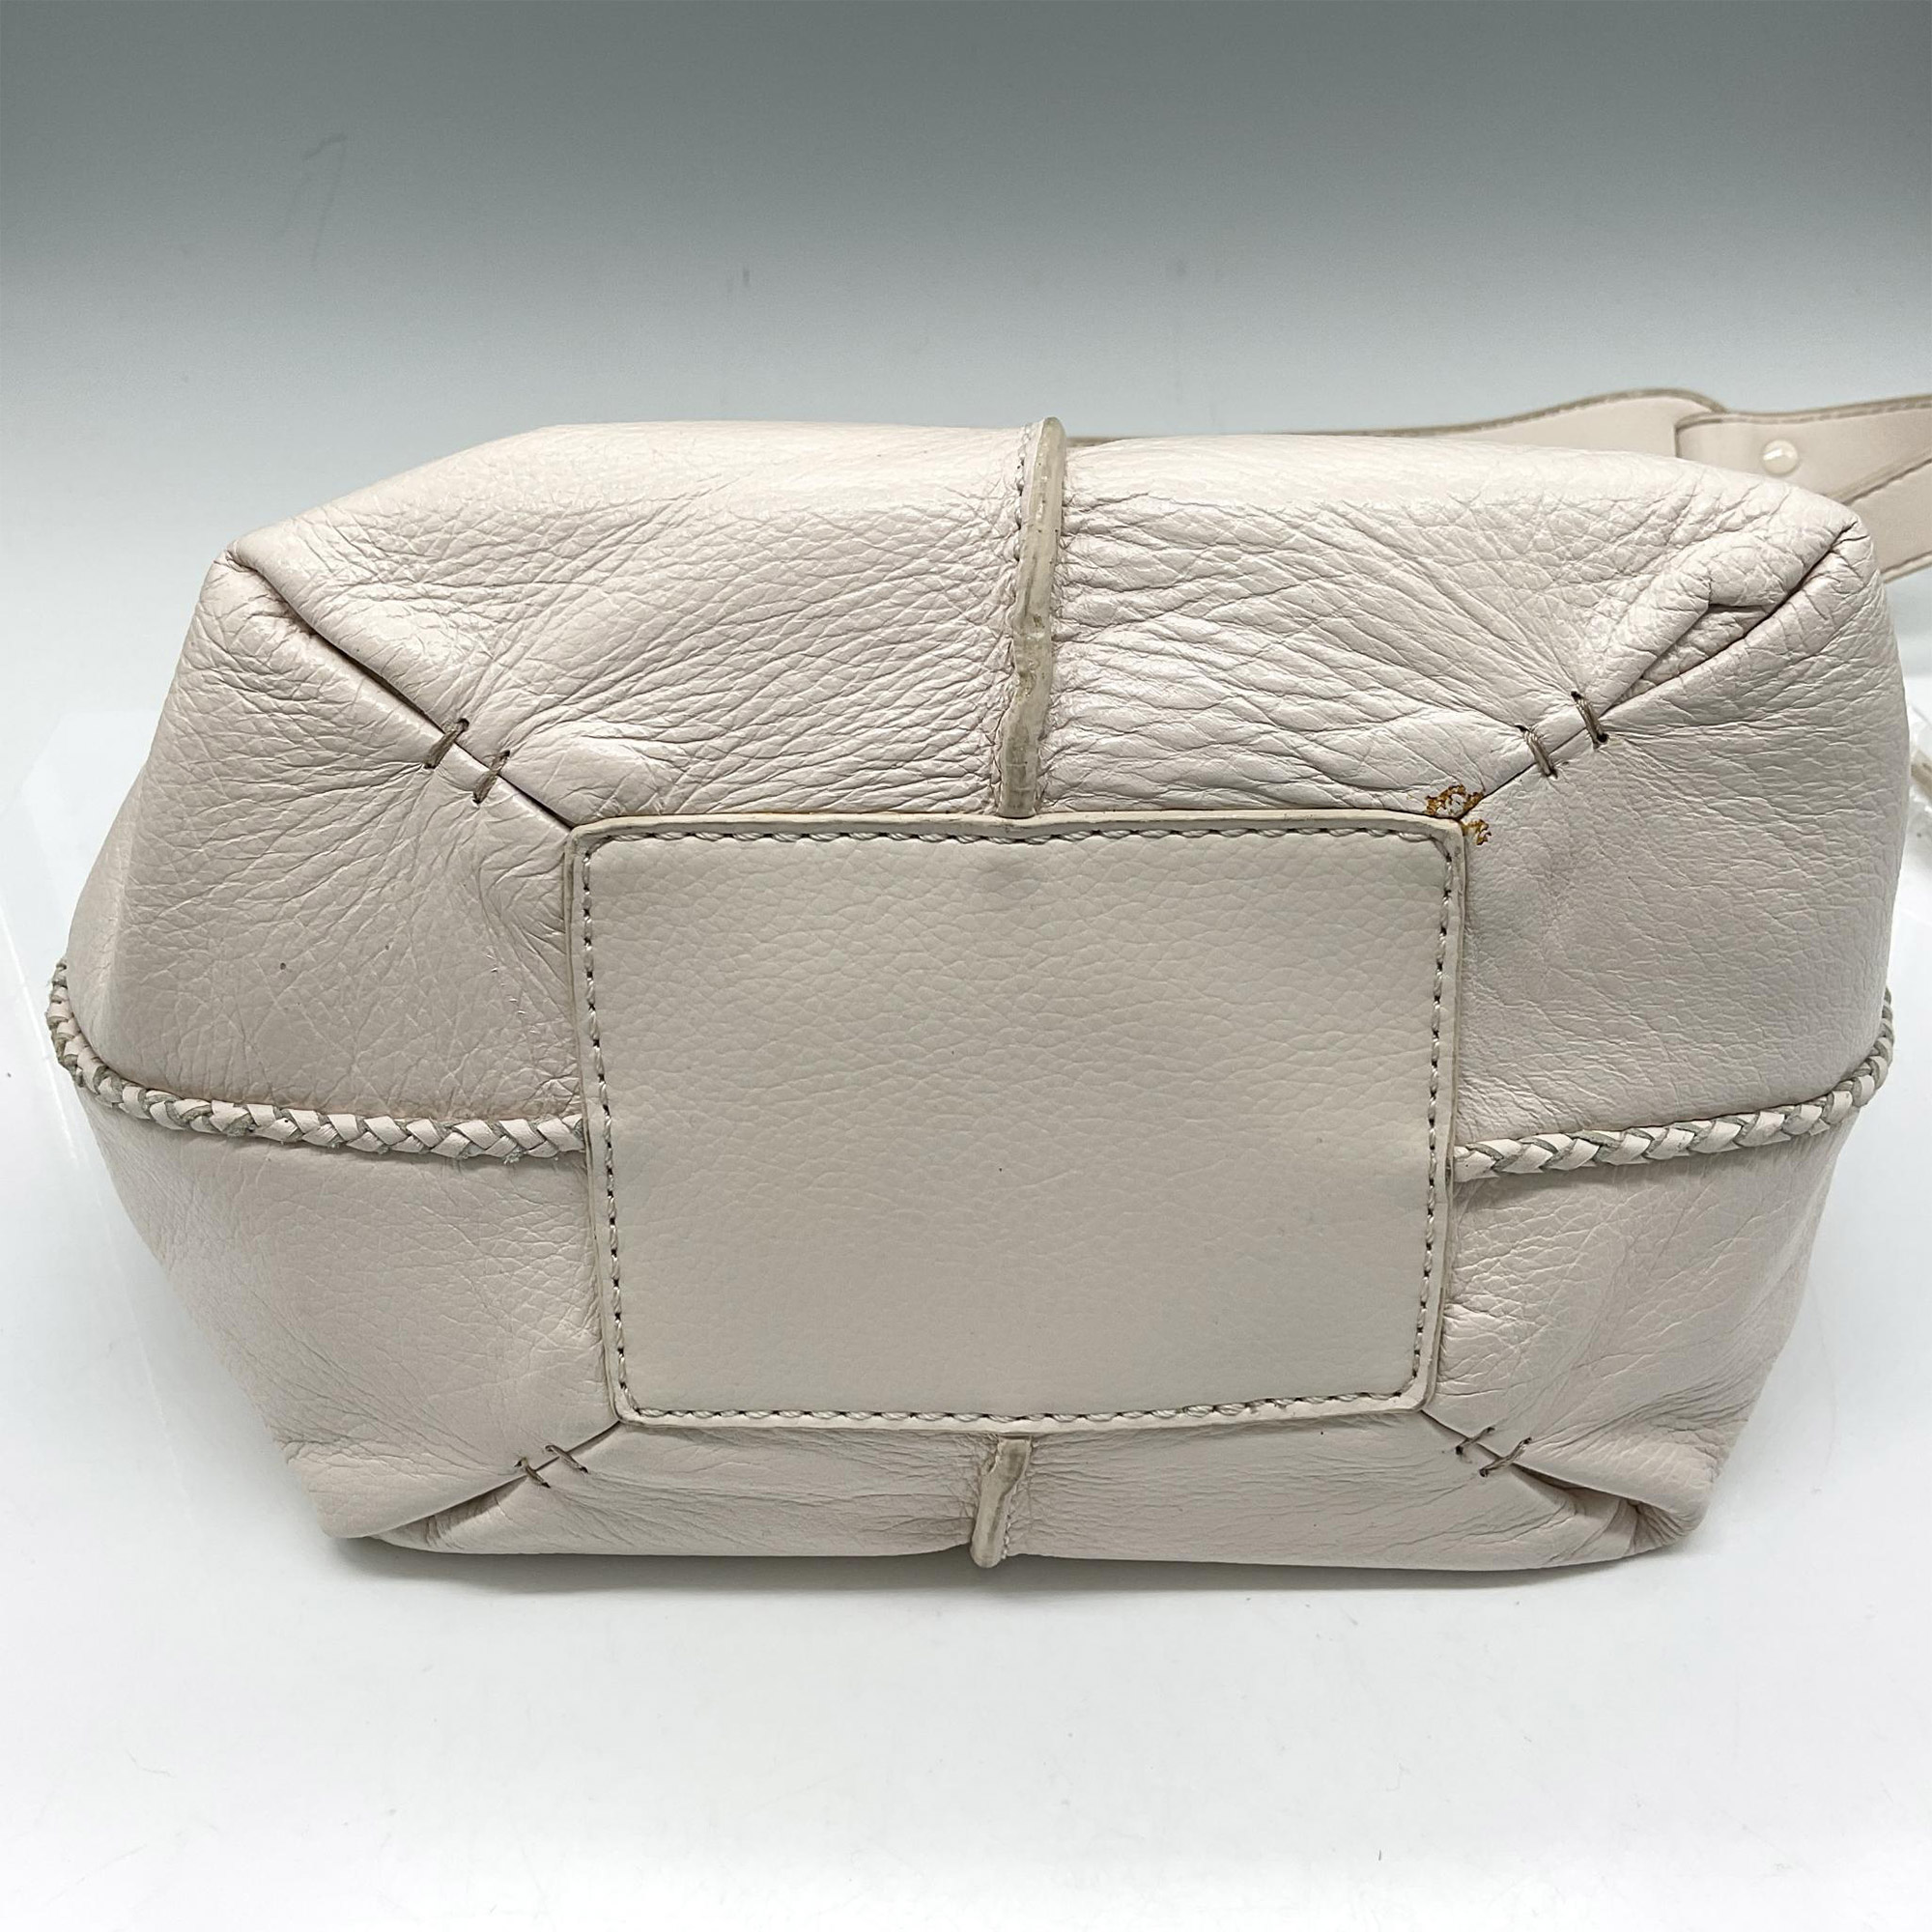 The Sak Purse, Pacific Style Leather Hobo in Stone - Image 3 of 3